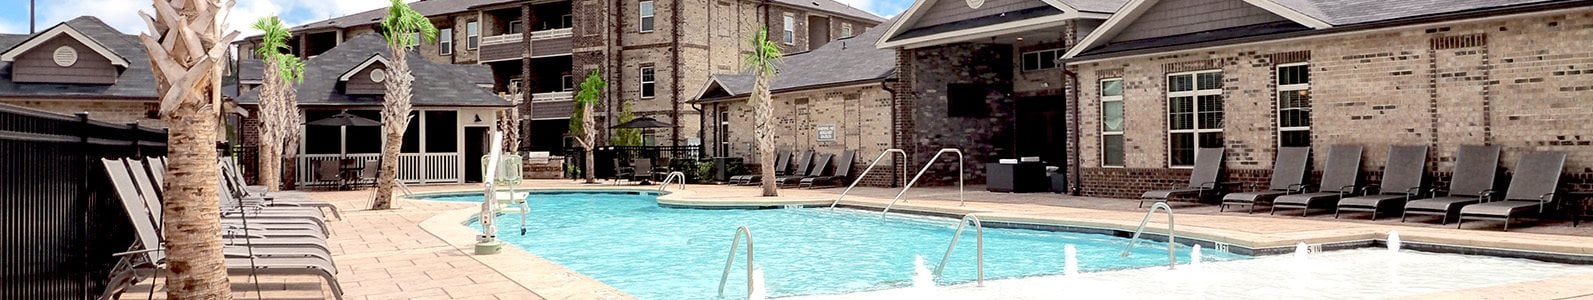 Pool Side Relaxing Area at Amberton at Stonewater, Cary, NC, 27519